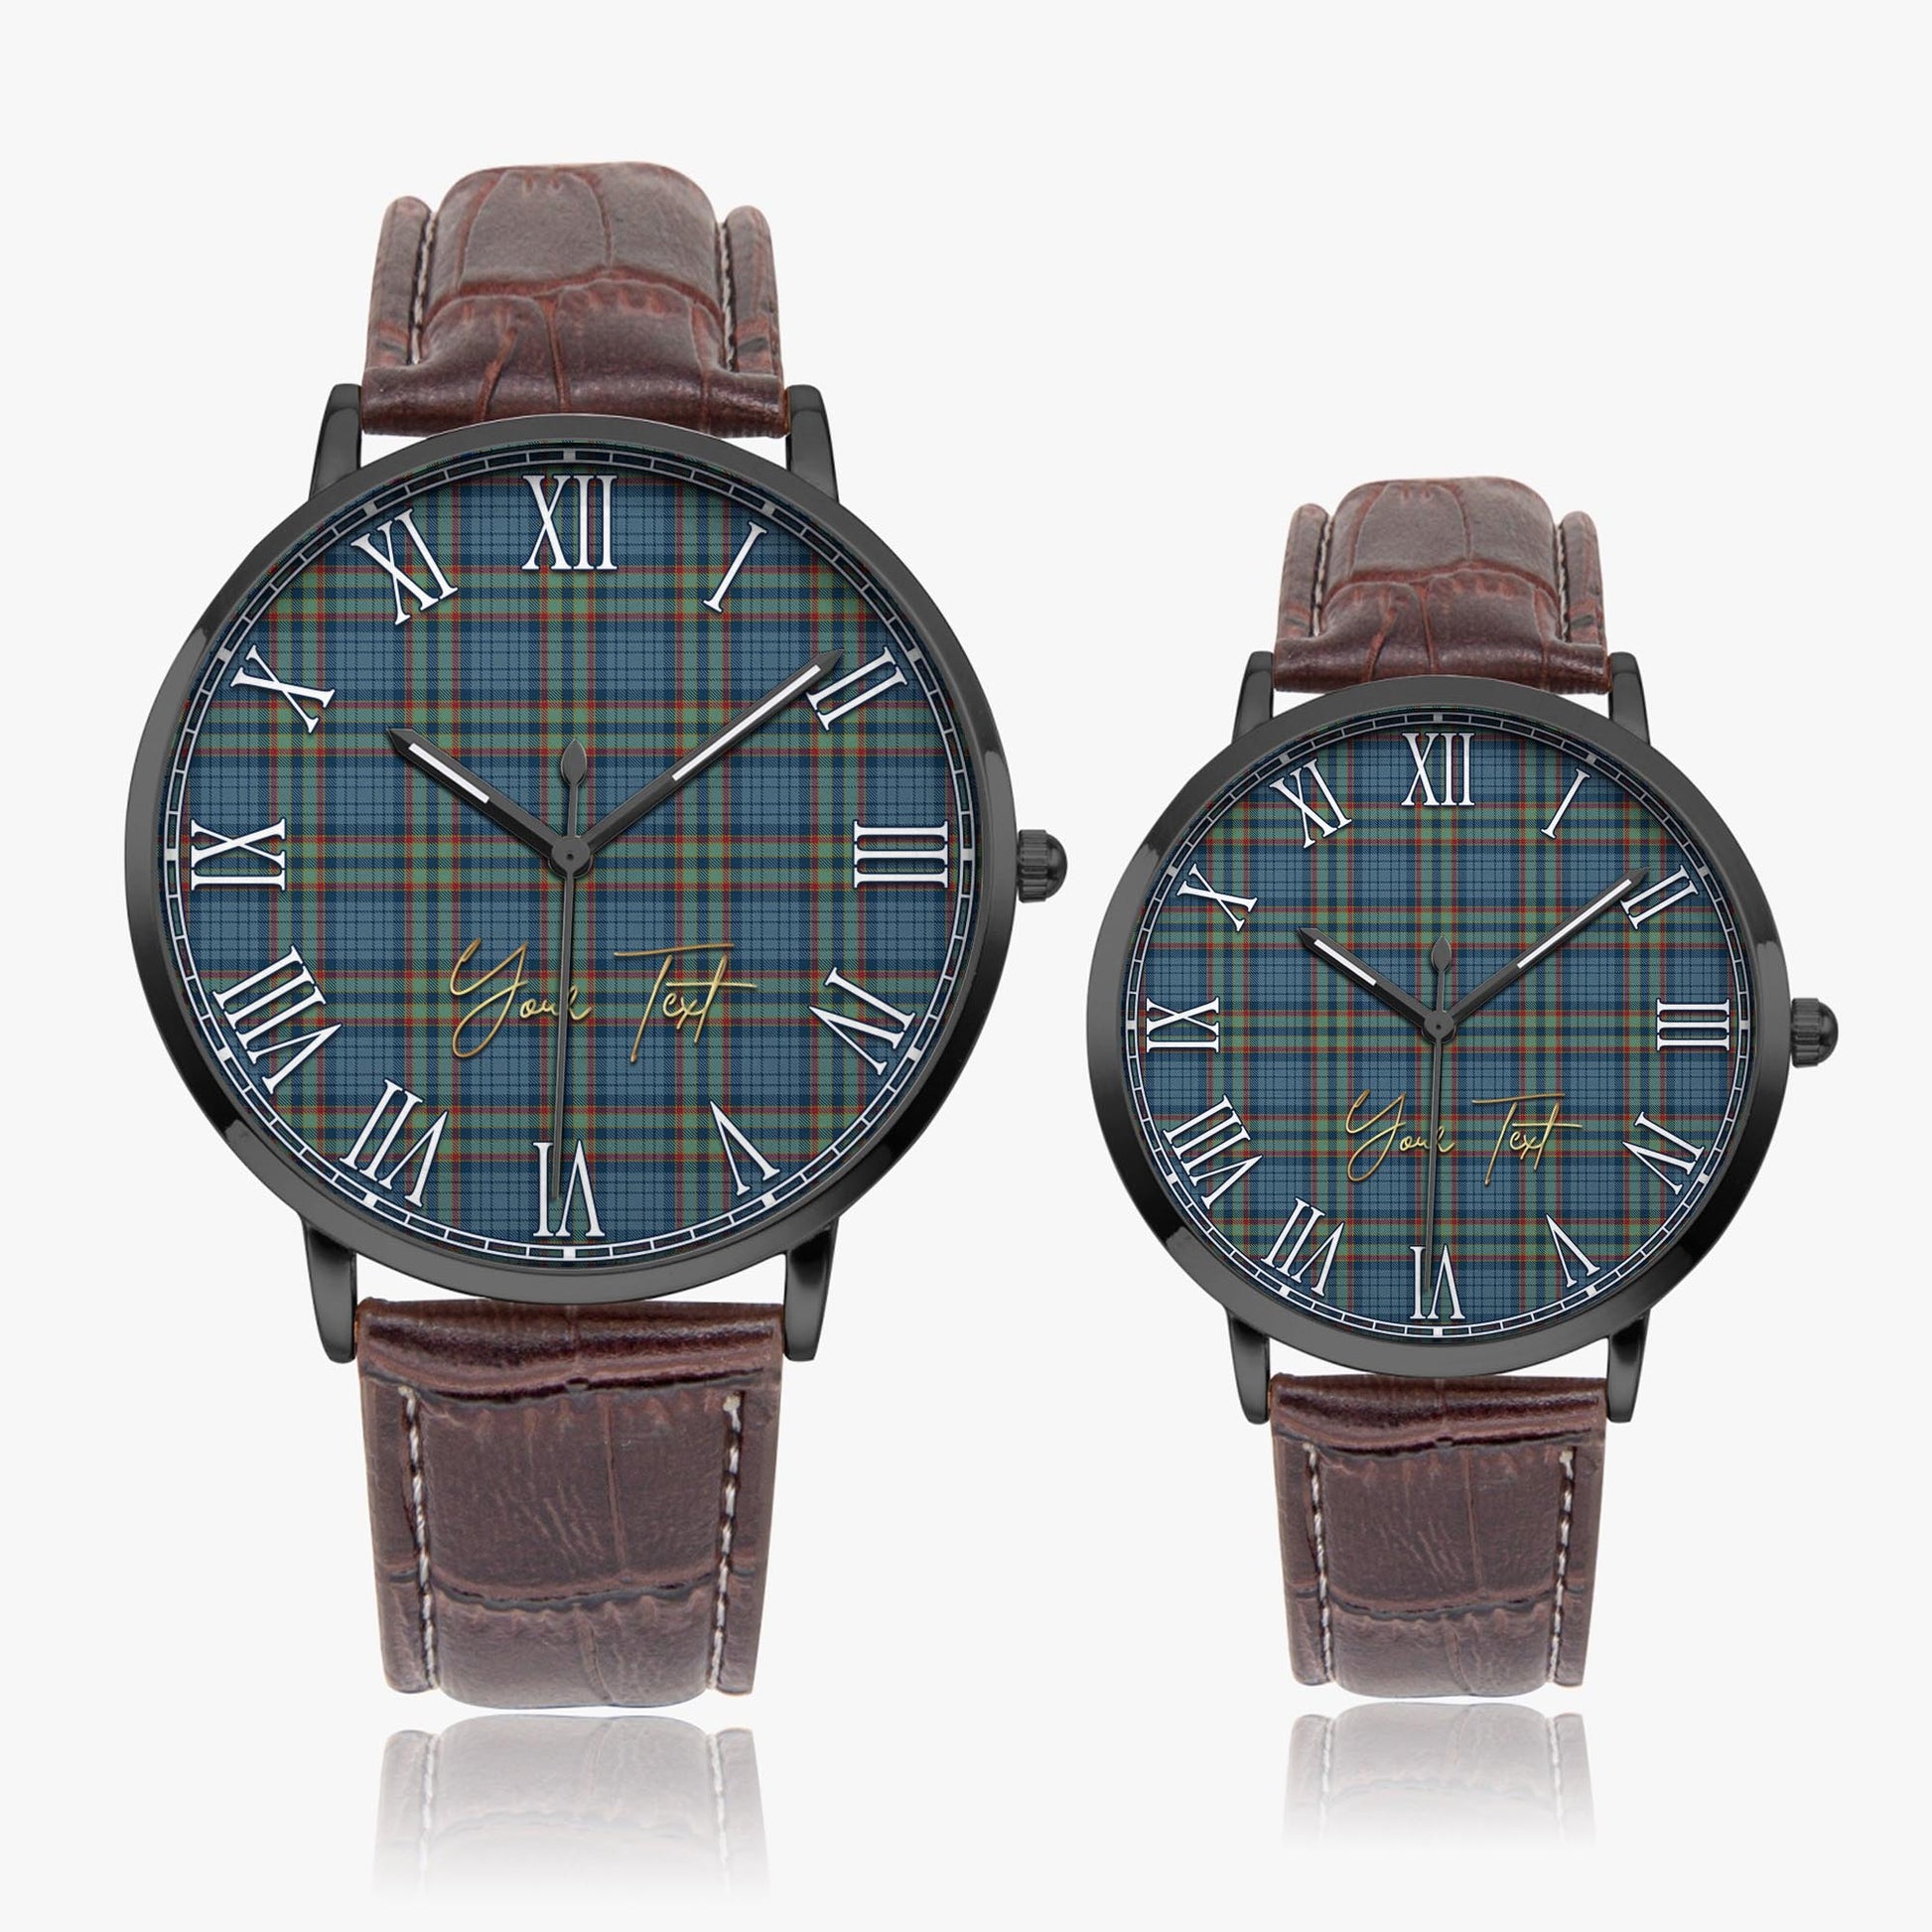 Ralston UK Tartan Personalized Your Text Leather Trap Quartz Watch Ultra Thin Black Case With Brown Leather Strap - Tartanvibesclothing